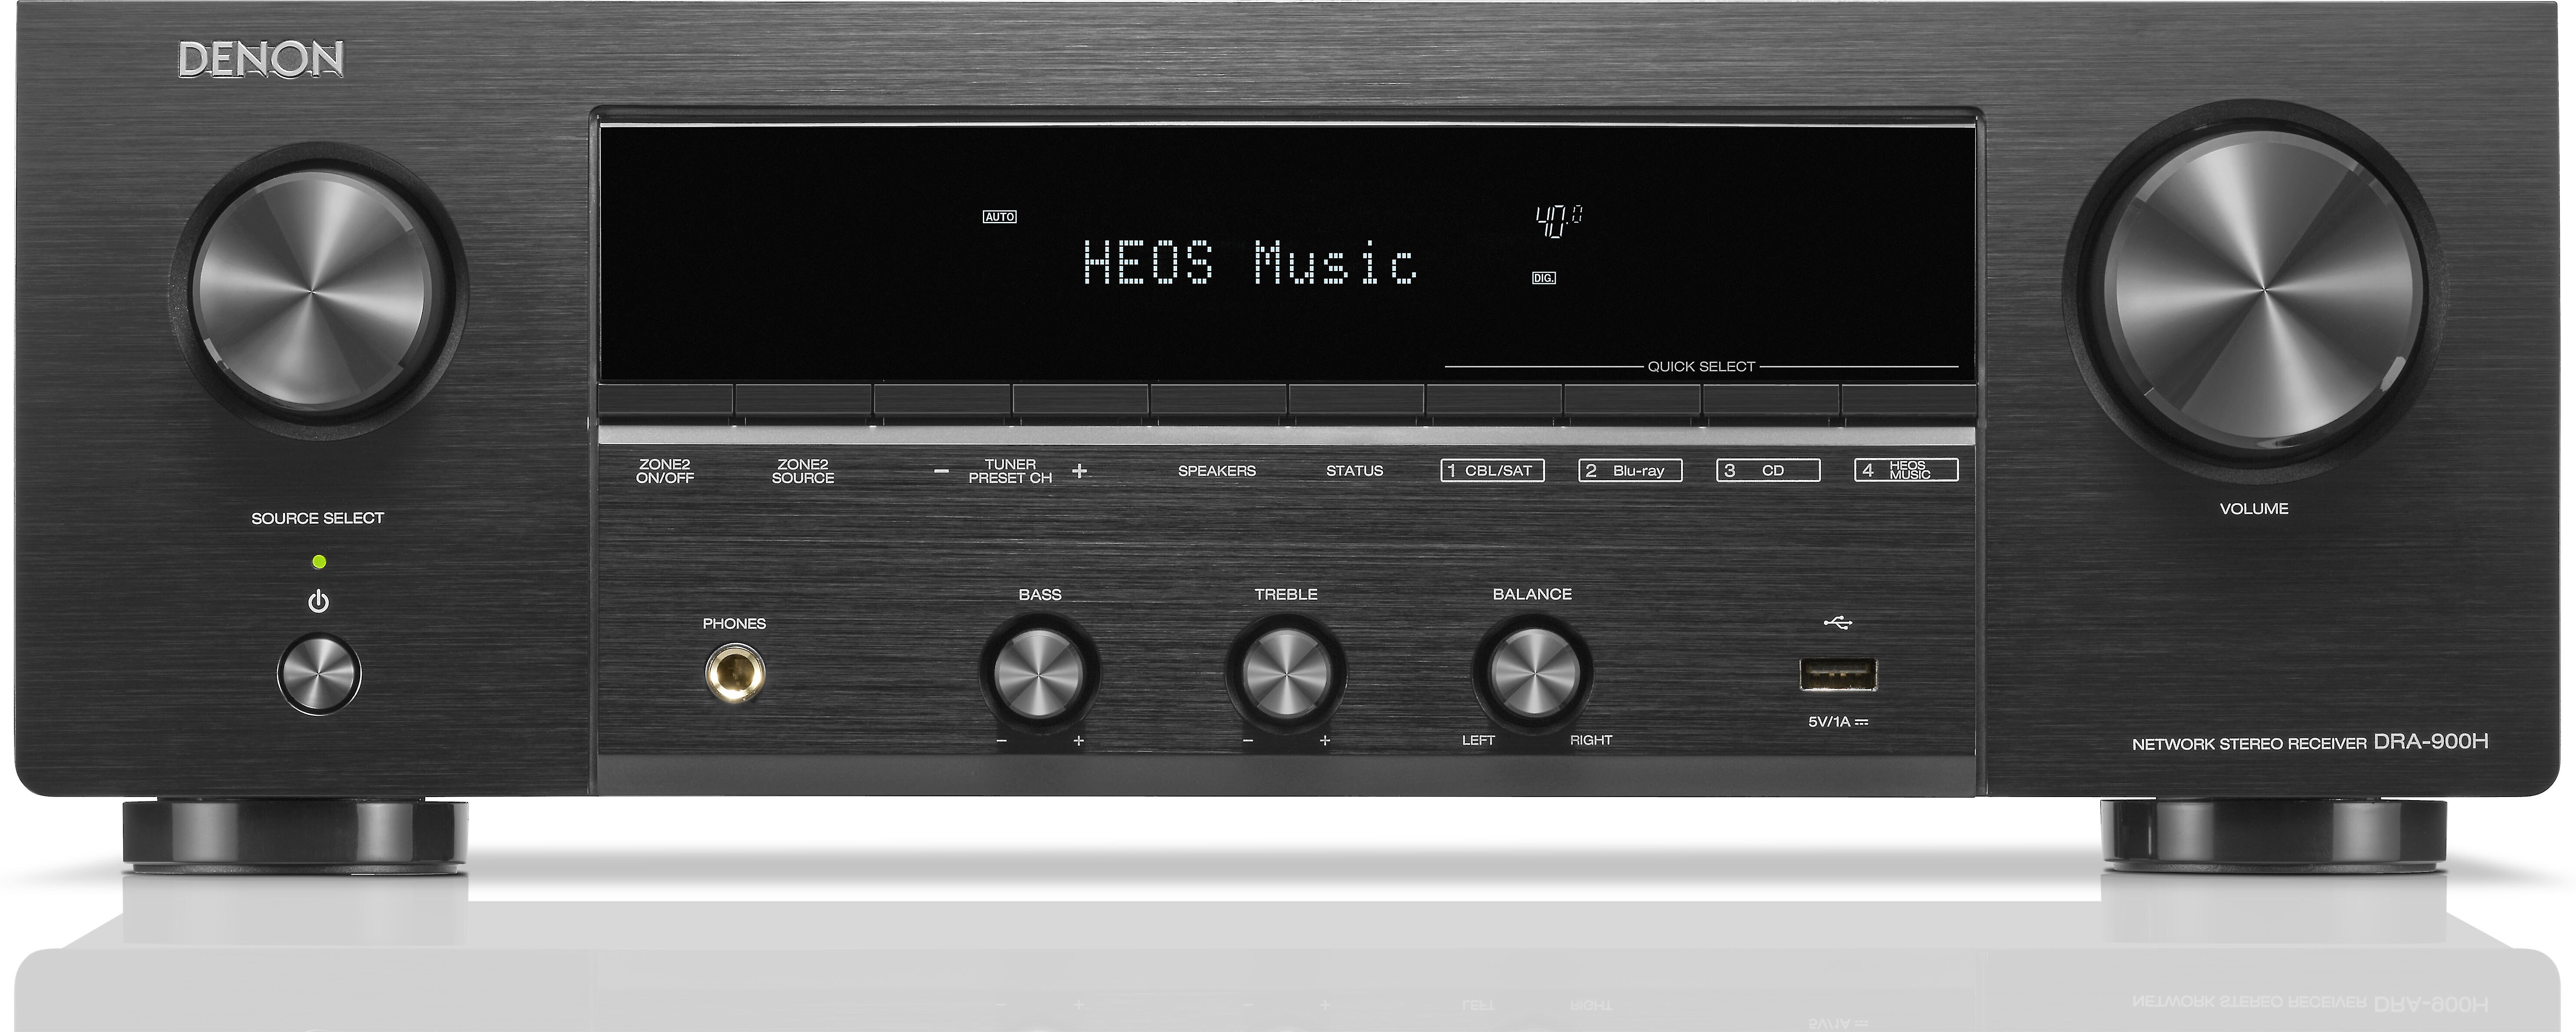 Product Videos: Denon DRA-900H Stereo receiver with built-in Wi-Fi®,  Bluetooth®, Apple AirPlay® 2, HDMI, and HEOS Built-in at Crutchfield